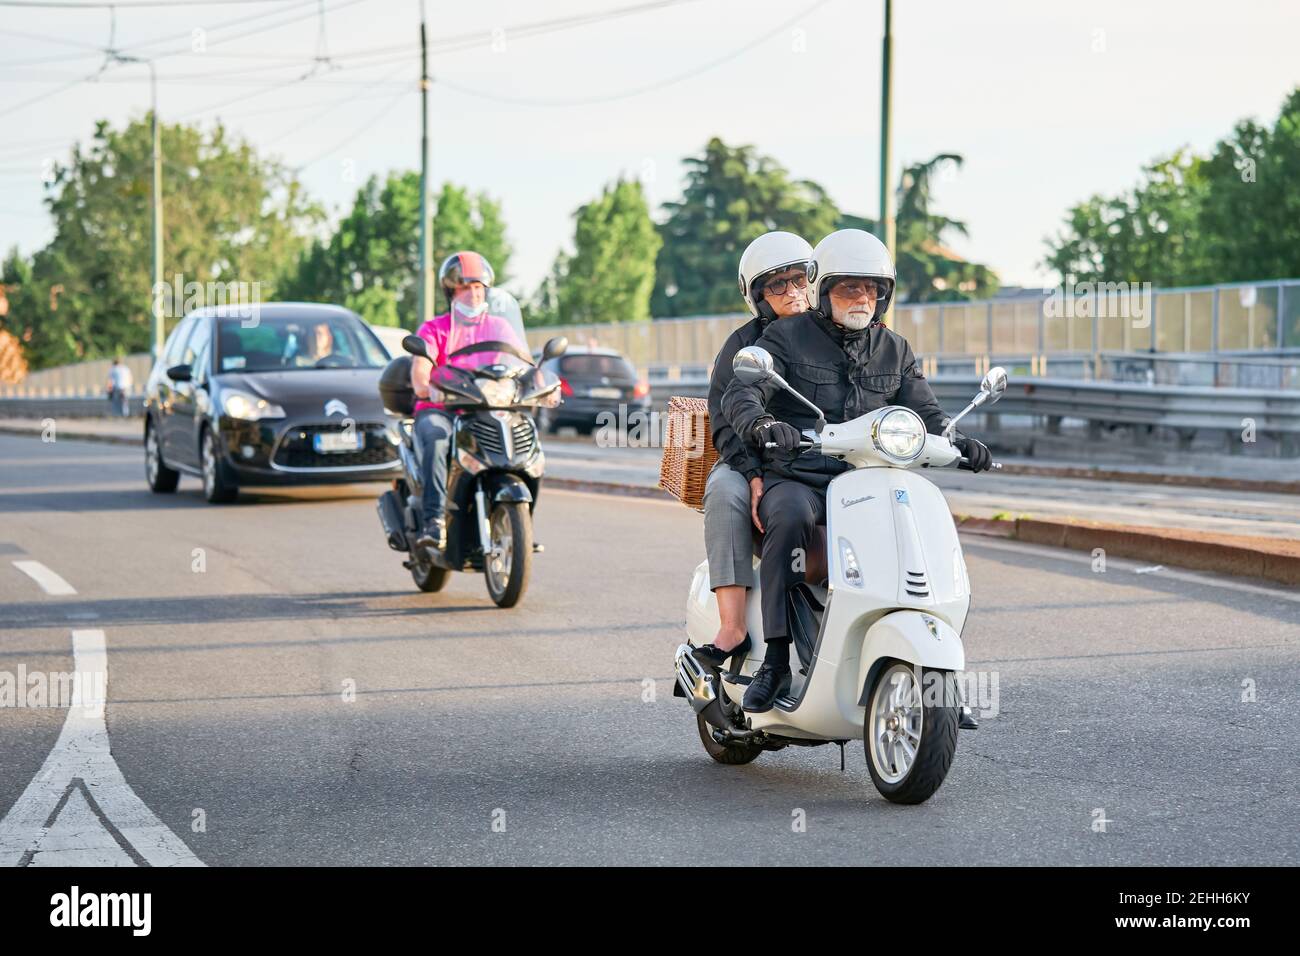 Senior couple riding motorbike in busy city street traffic. Motorcyclists driving motorcycle and cars on the road. Milan, Italy - May 26, 2020 Stock Photo